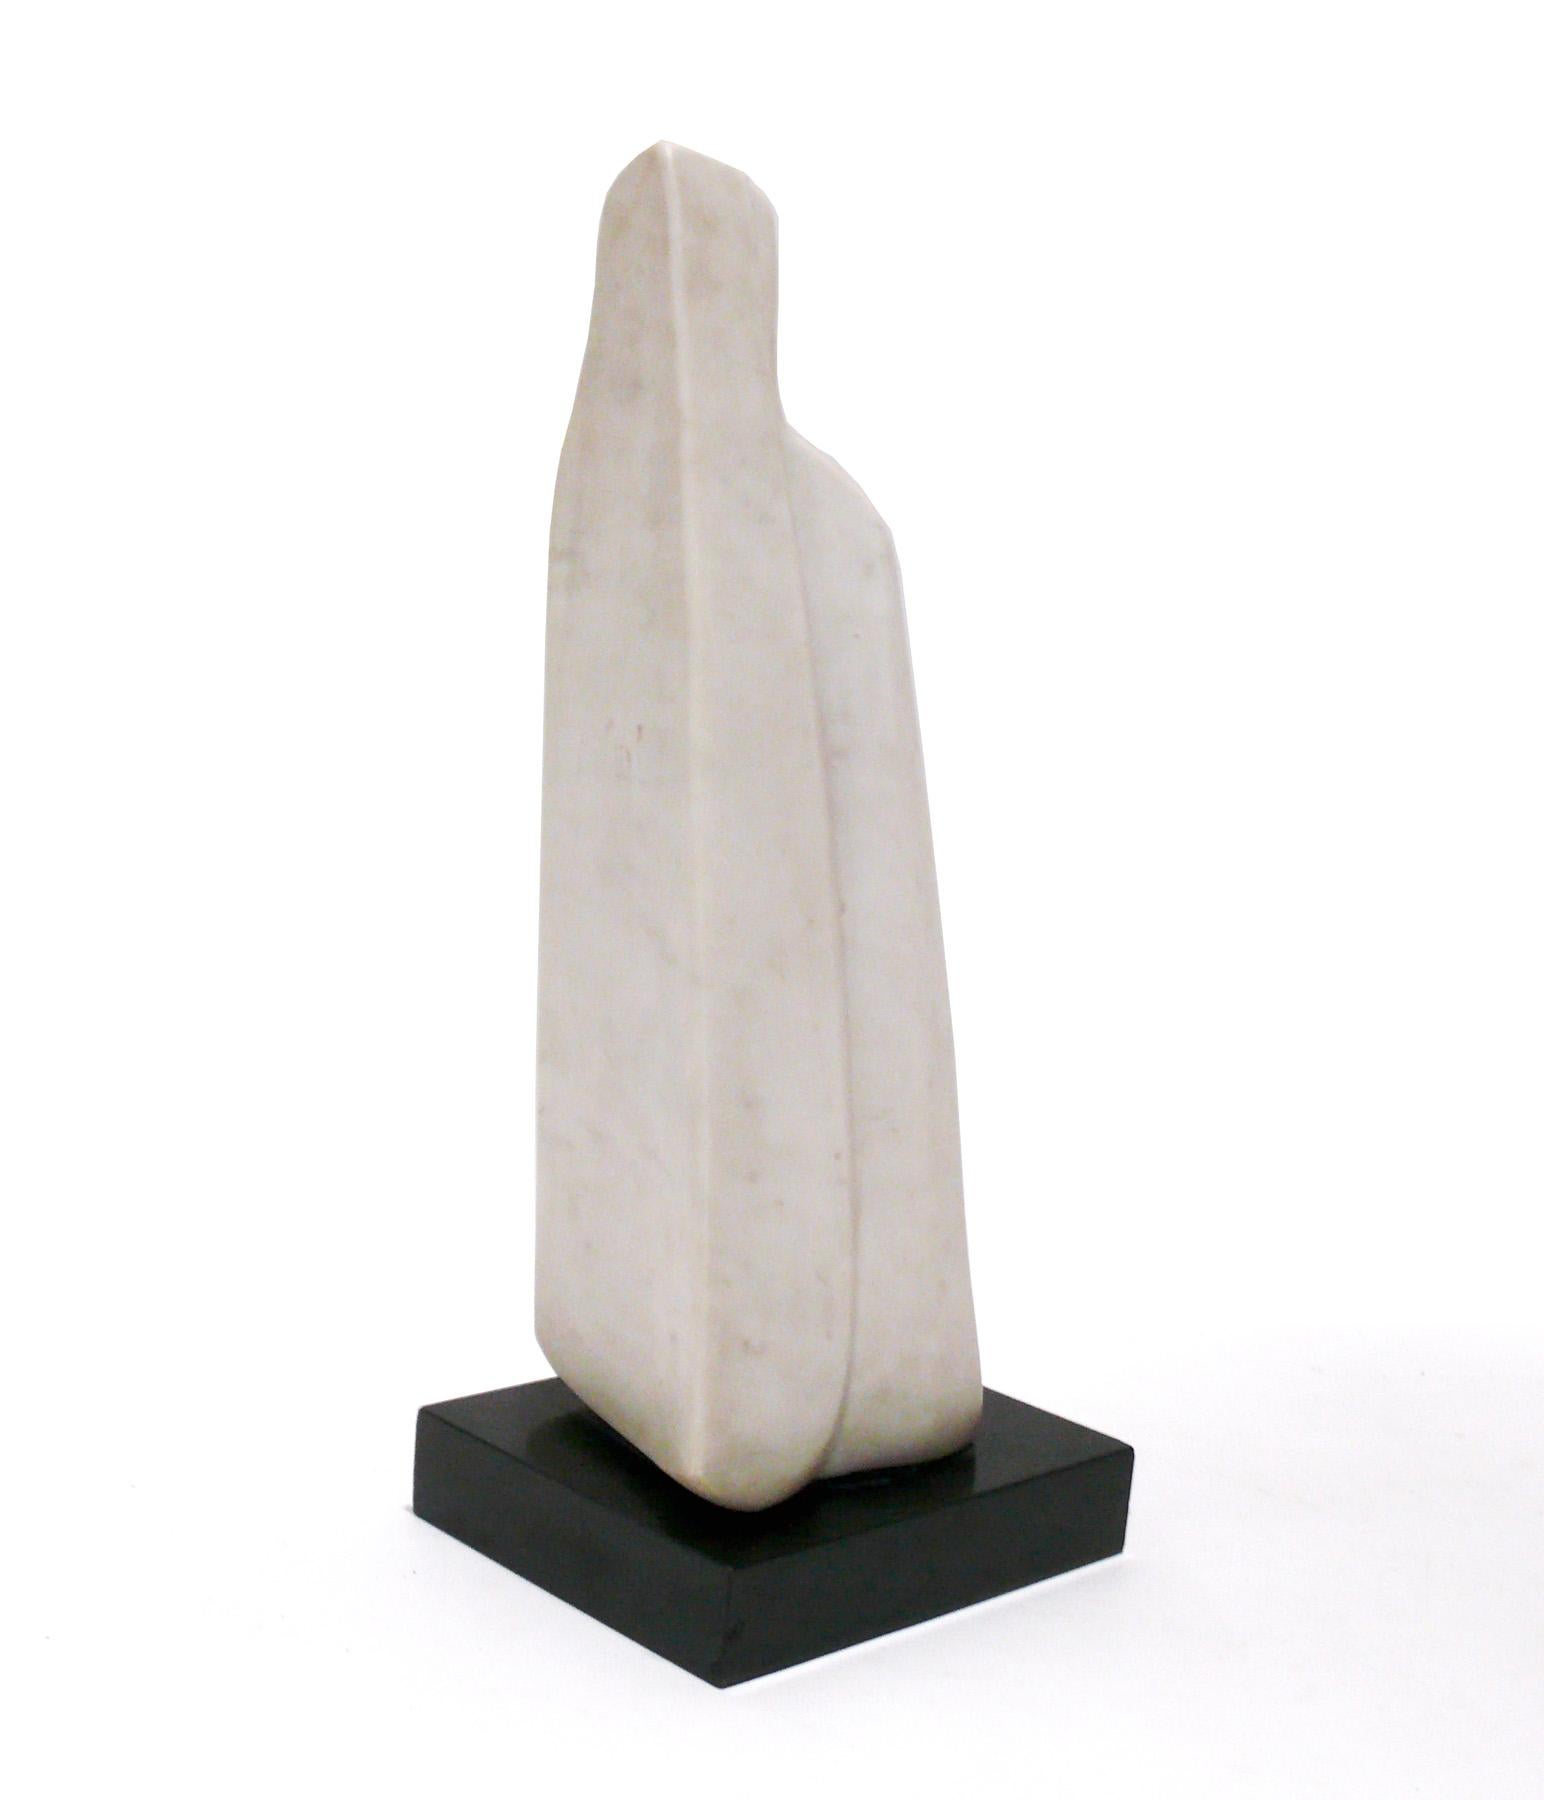 Modernist White Marble Sculpture, hand made by Michel Elia, French, circa 1970s. It measures an impressive 18.75